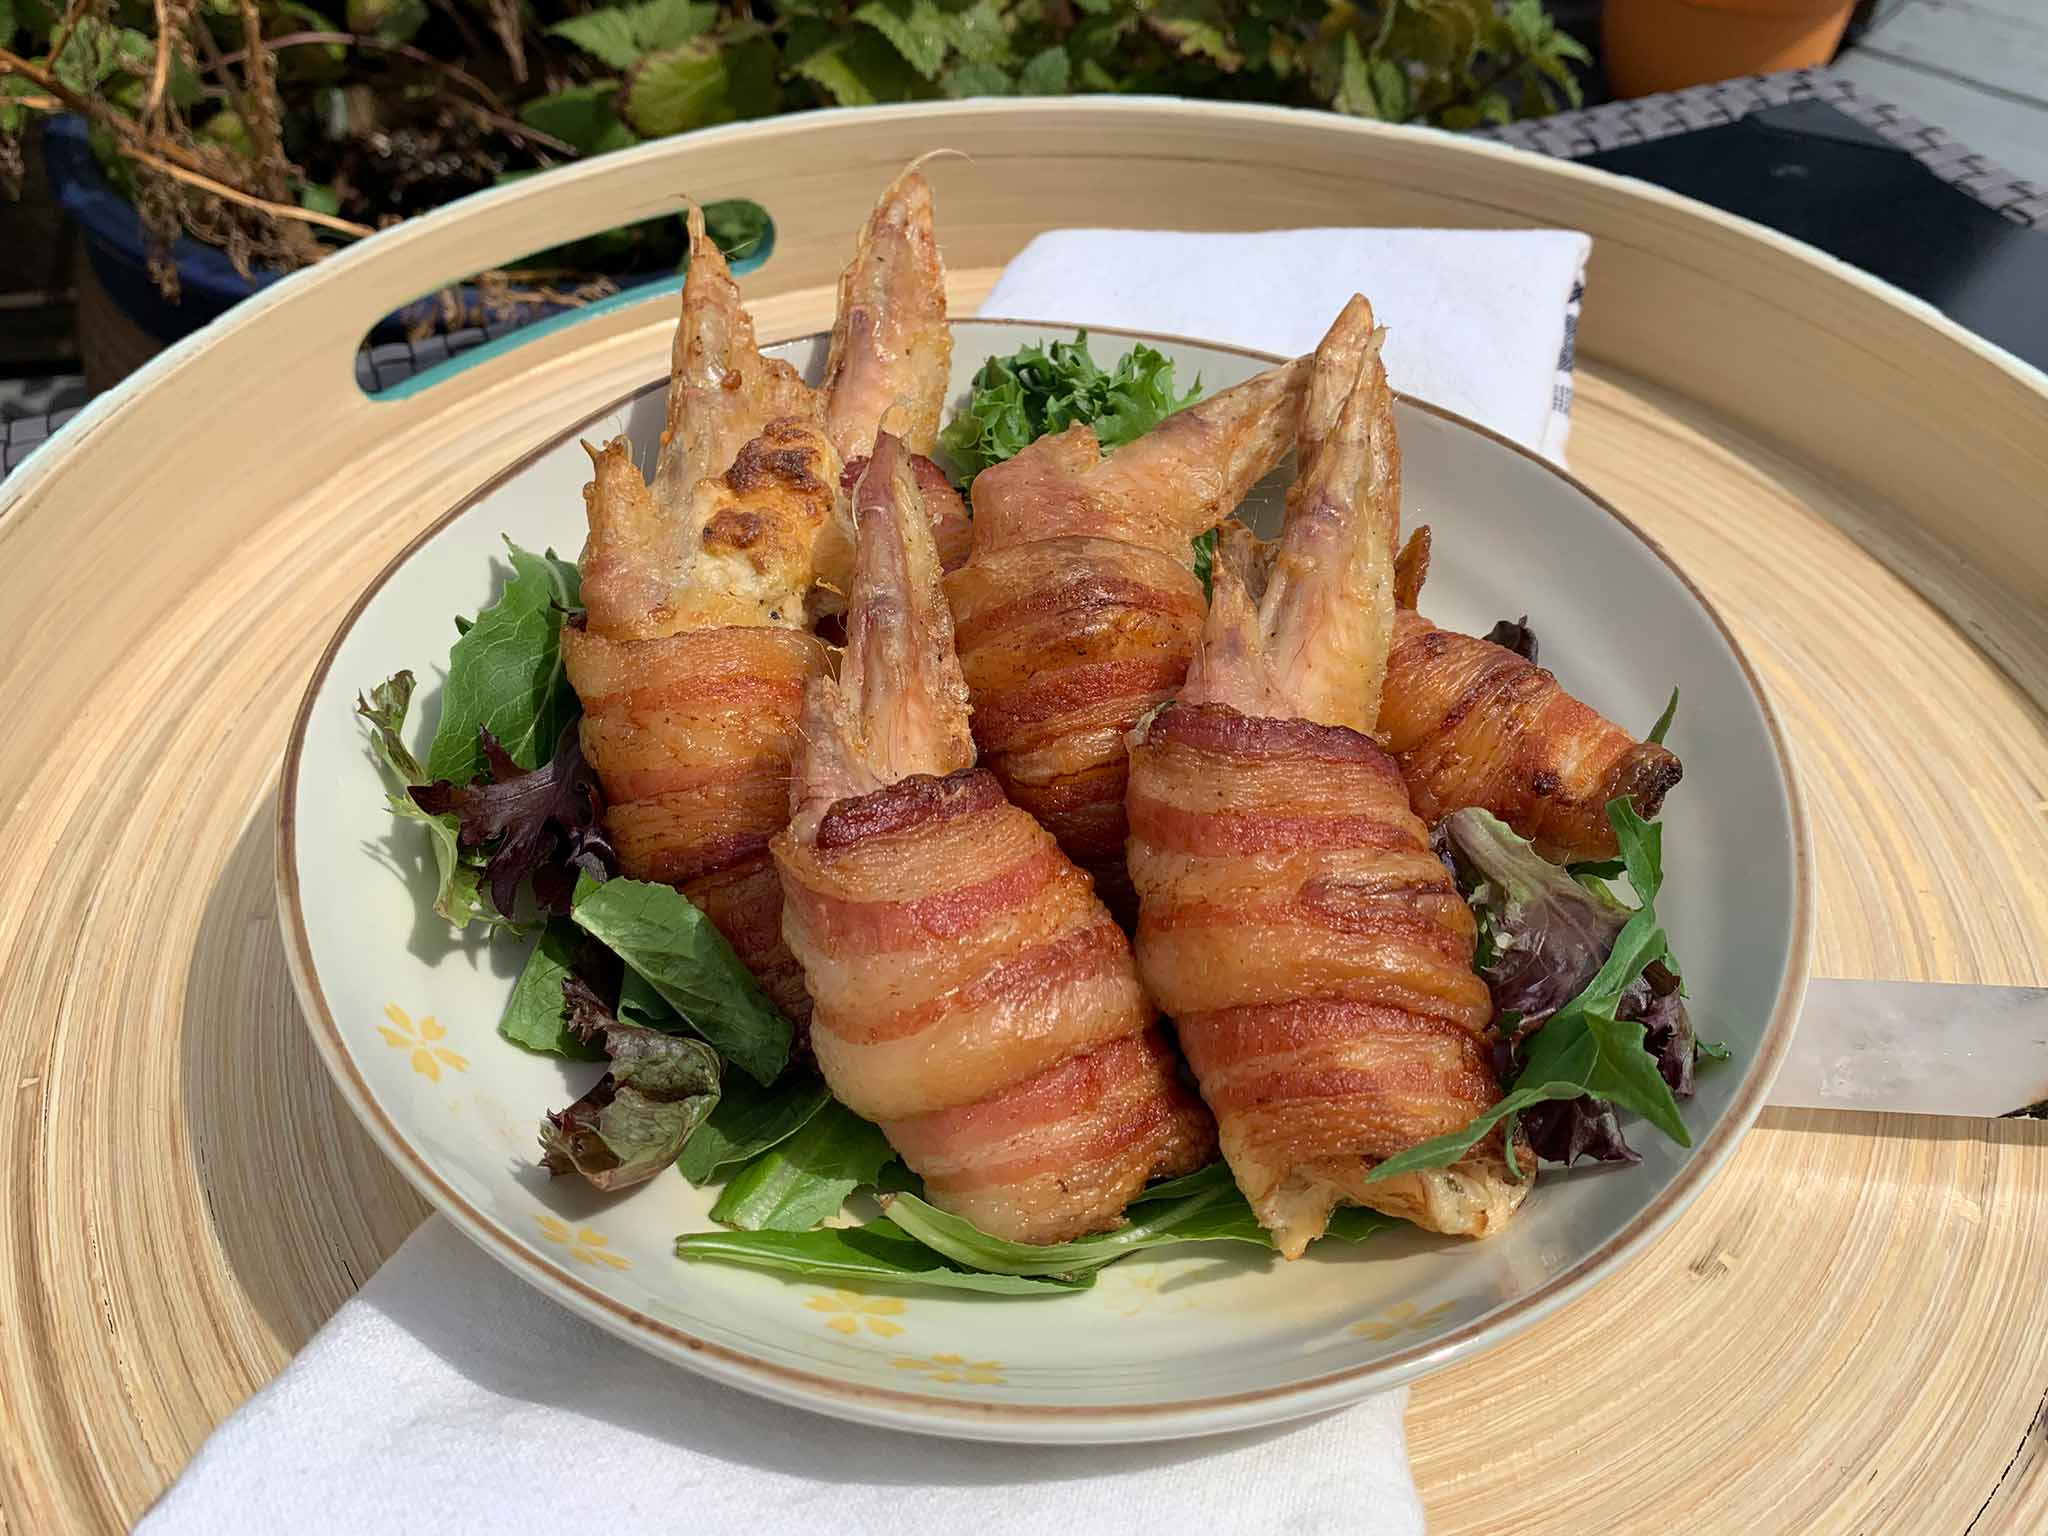 Crab & Cheese Stuffed Chicken Wings wrapped in Bacon